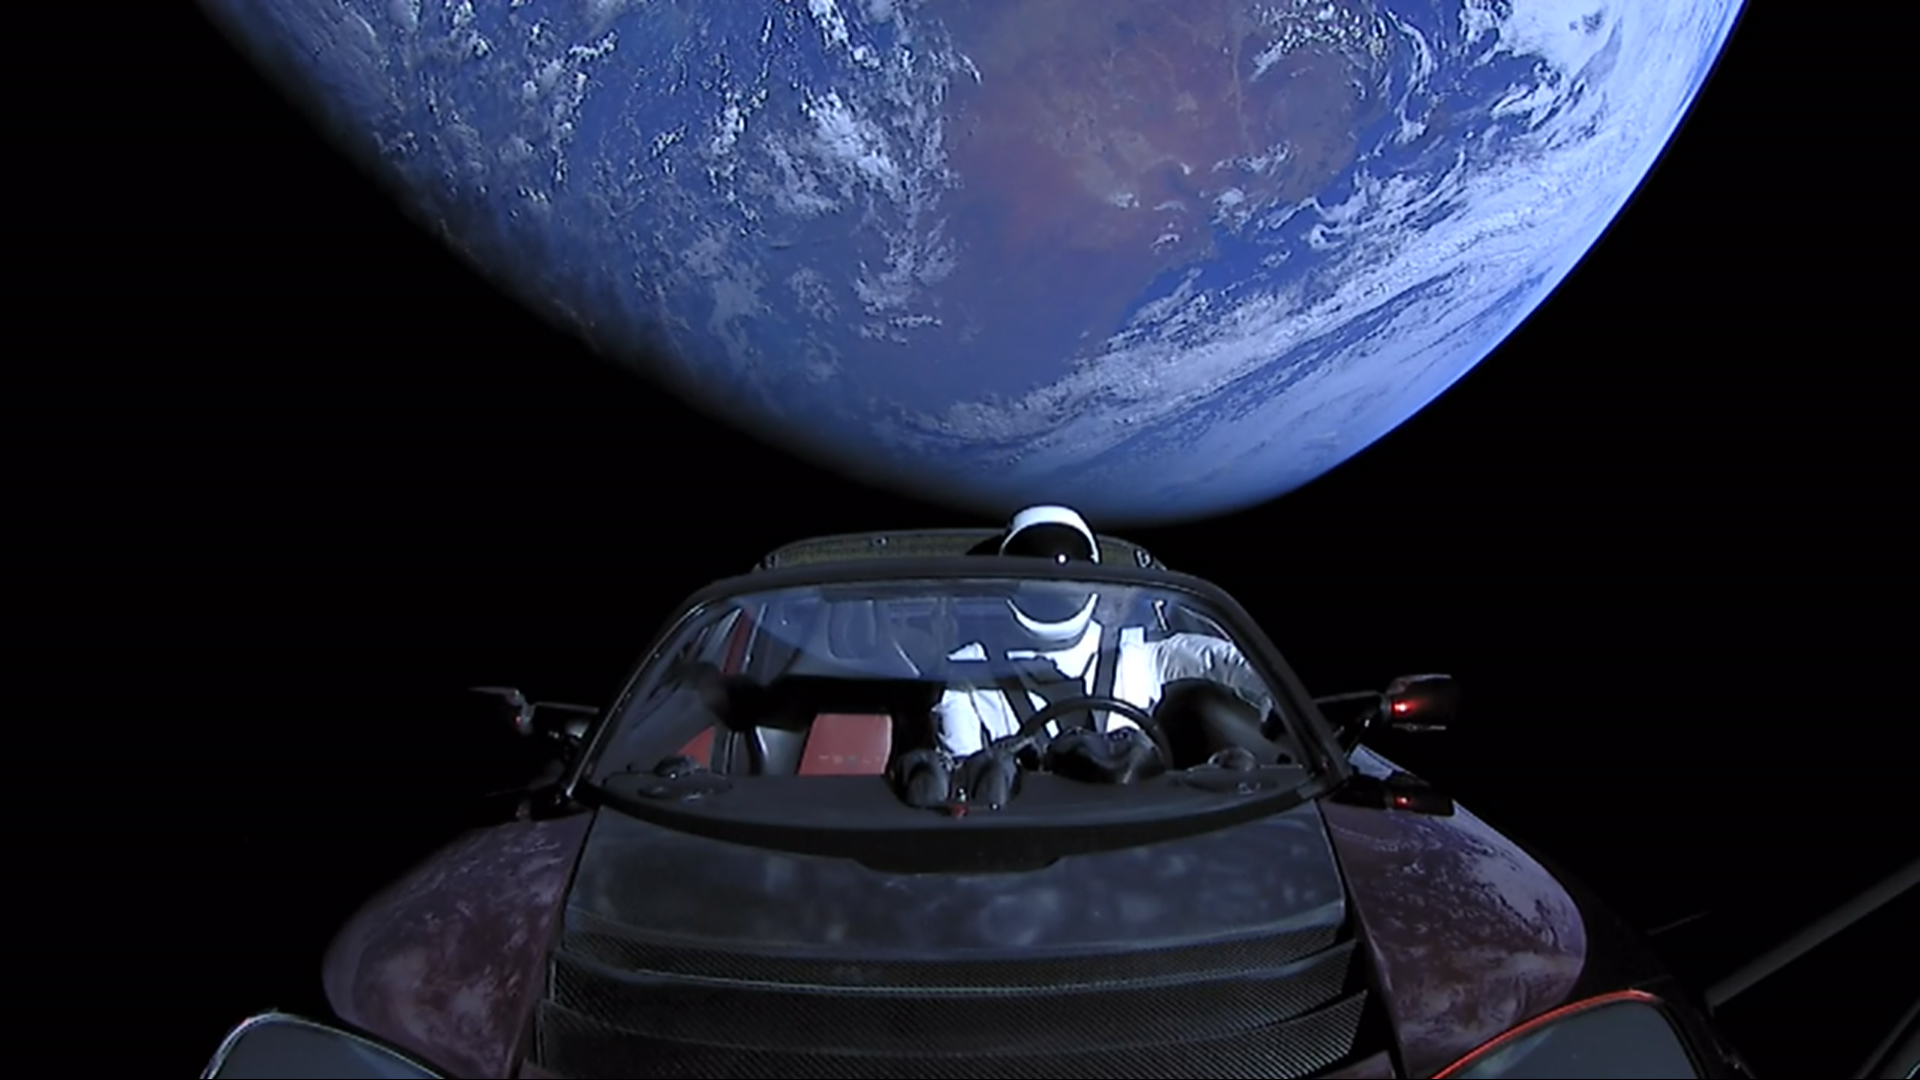 The Tesla Roadster has been flying in space for 5 years - it has travelled over 4 billion kilometres, circled the Sun 3.5 times and is now in orbit around Mars